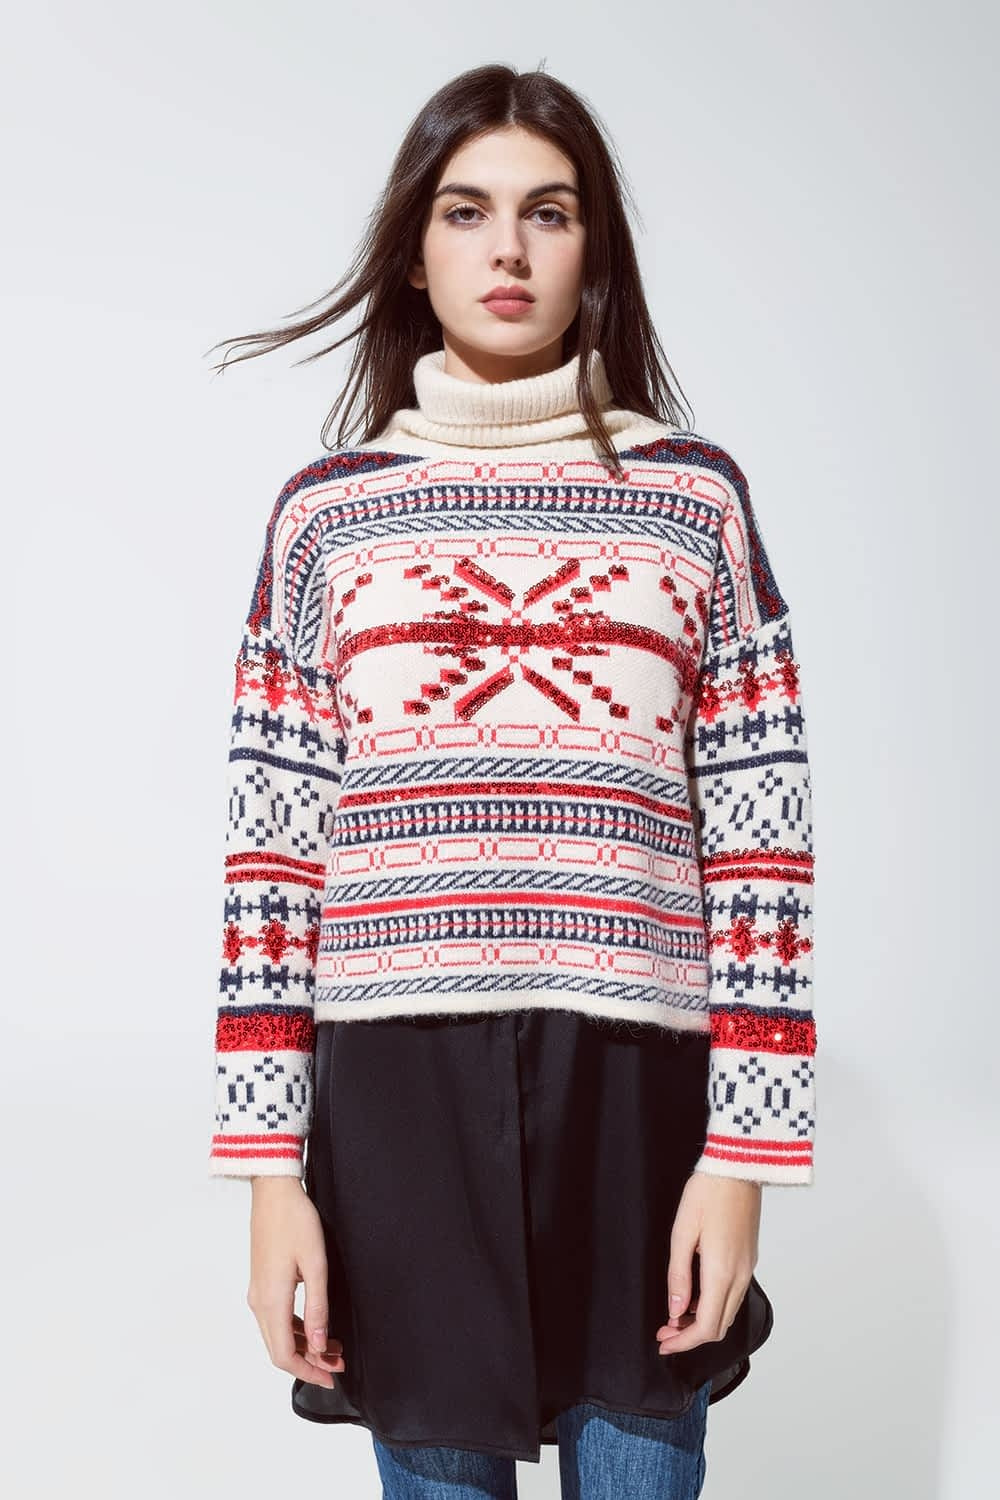 Q2 Chrstismas Sweater with Turtle Neck and Embroidered Sequin Details In Cream